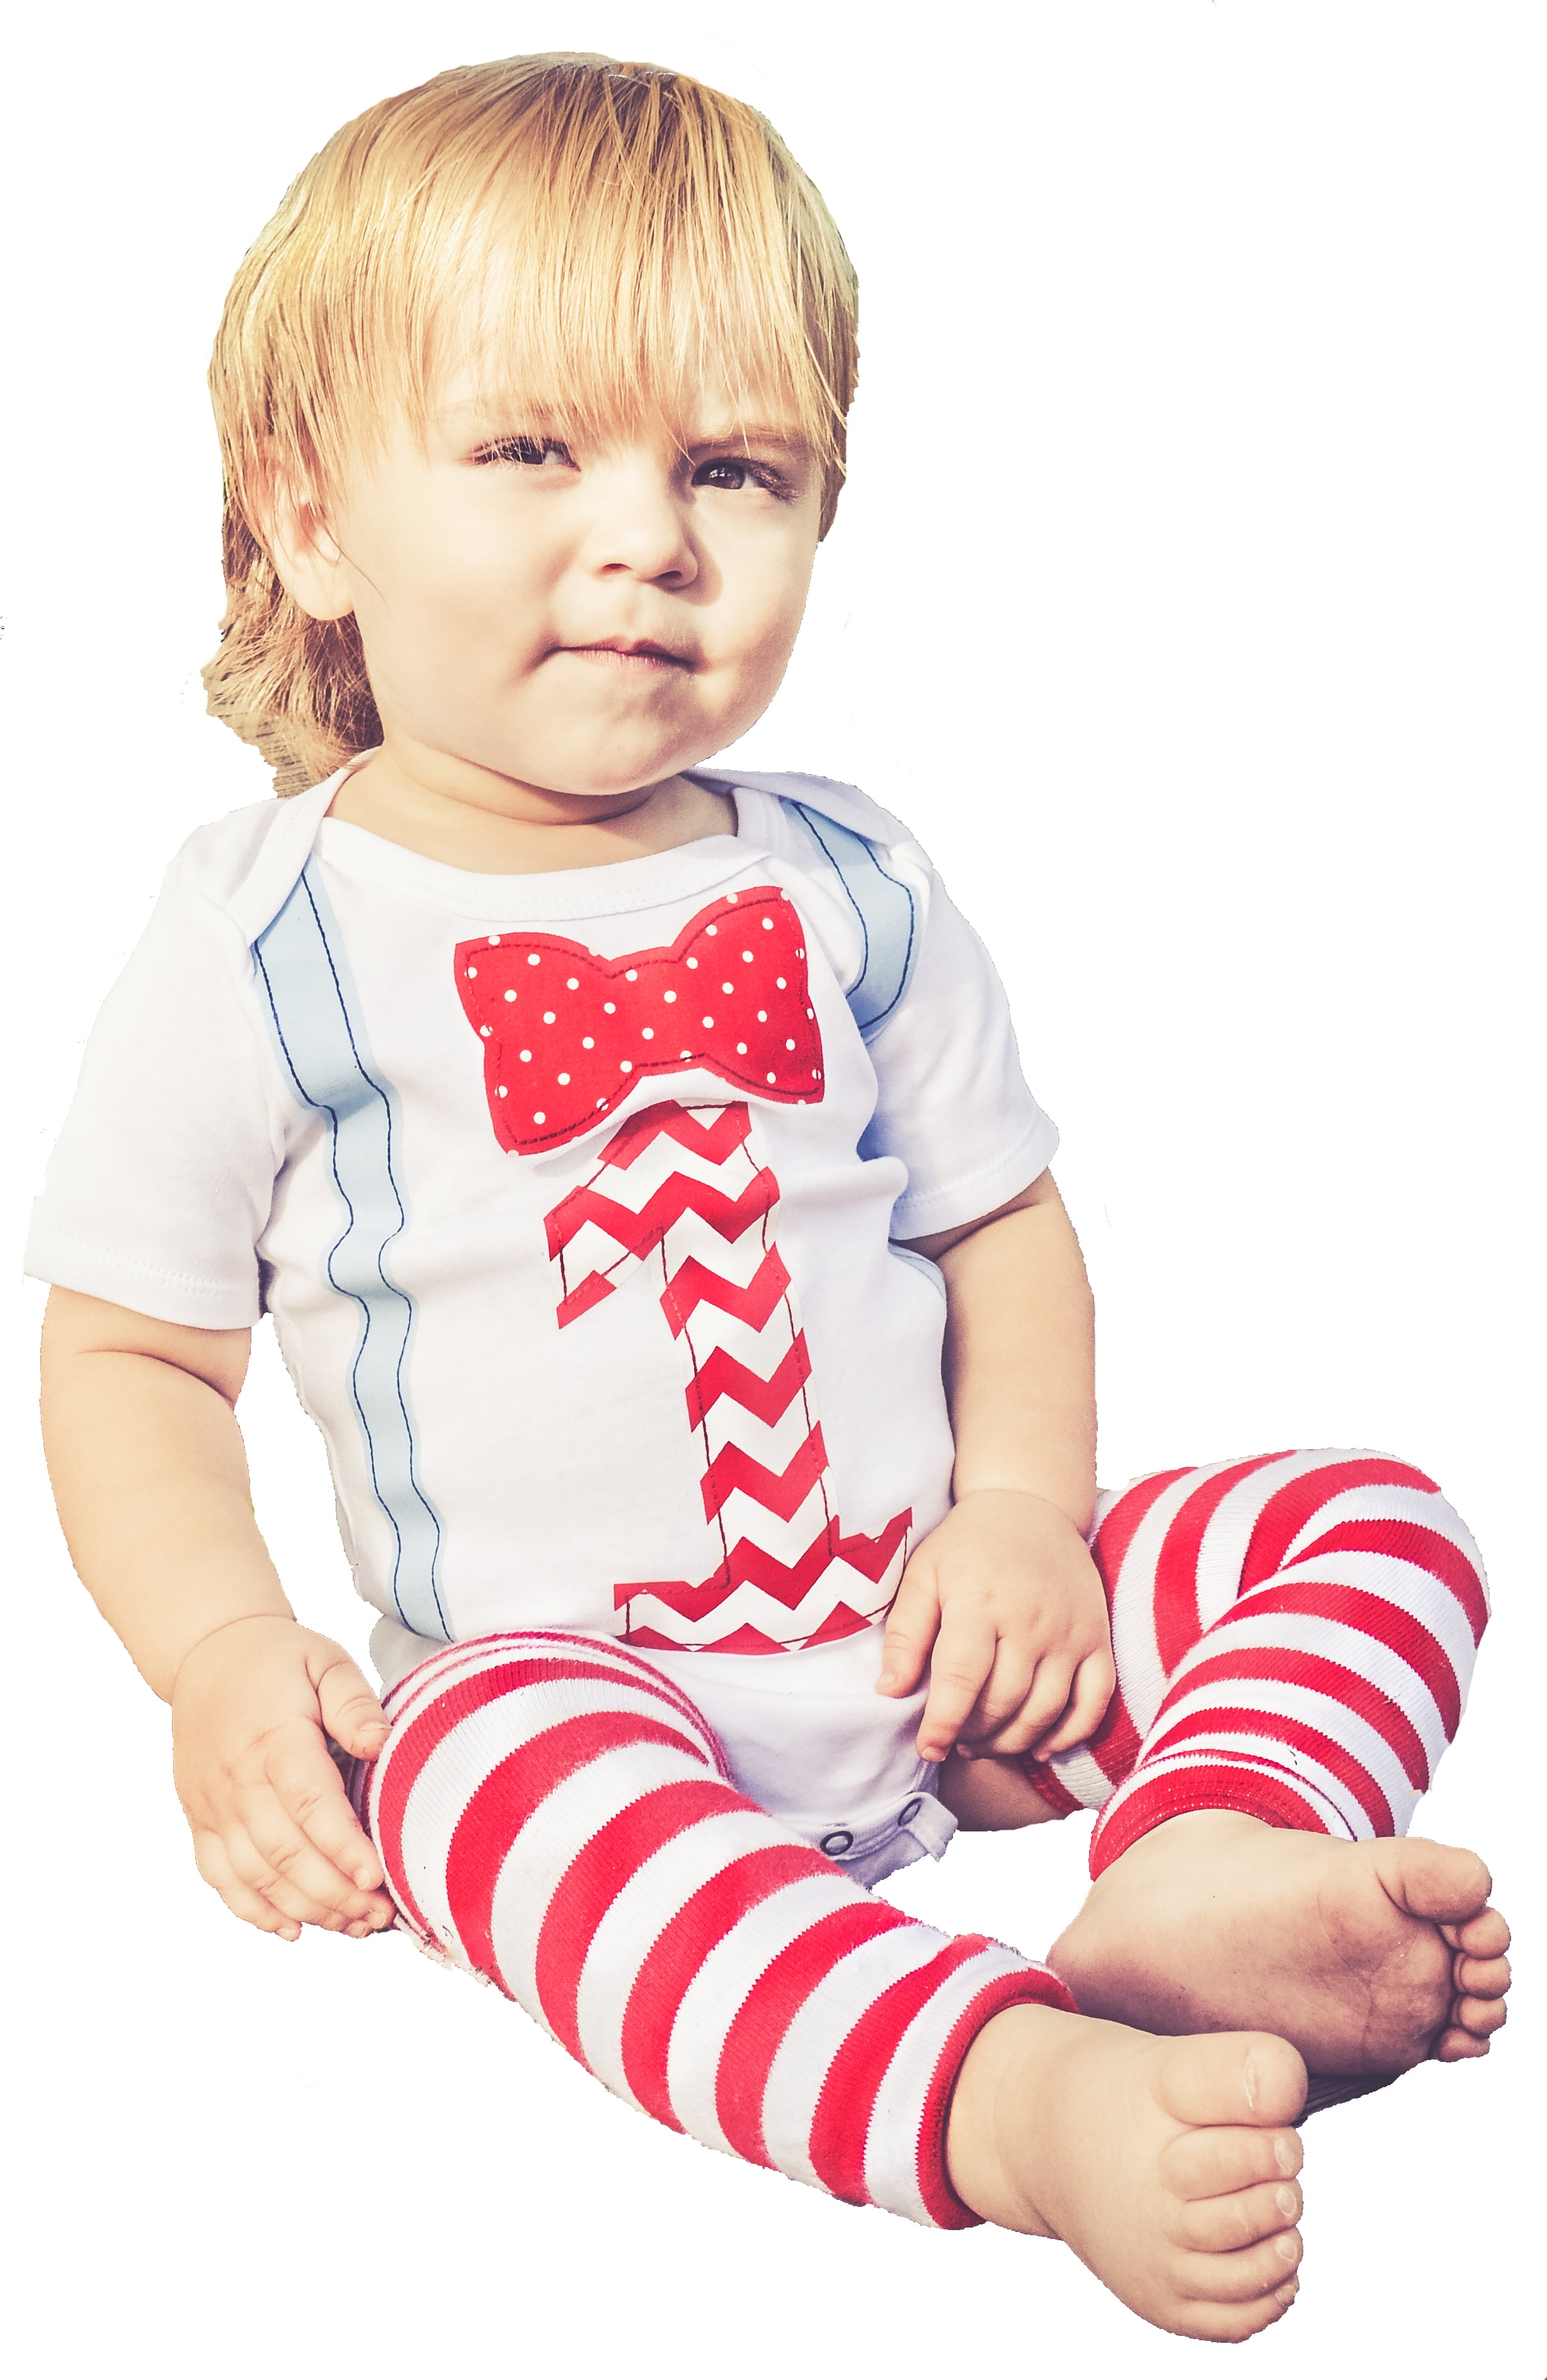 FMYFWY Baby Boys 1st Birthday Outfits Cake Smash Photo Props 4Pcs Clothes Set ONE Bloomers Suspenders Bowtie Headband